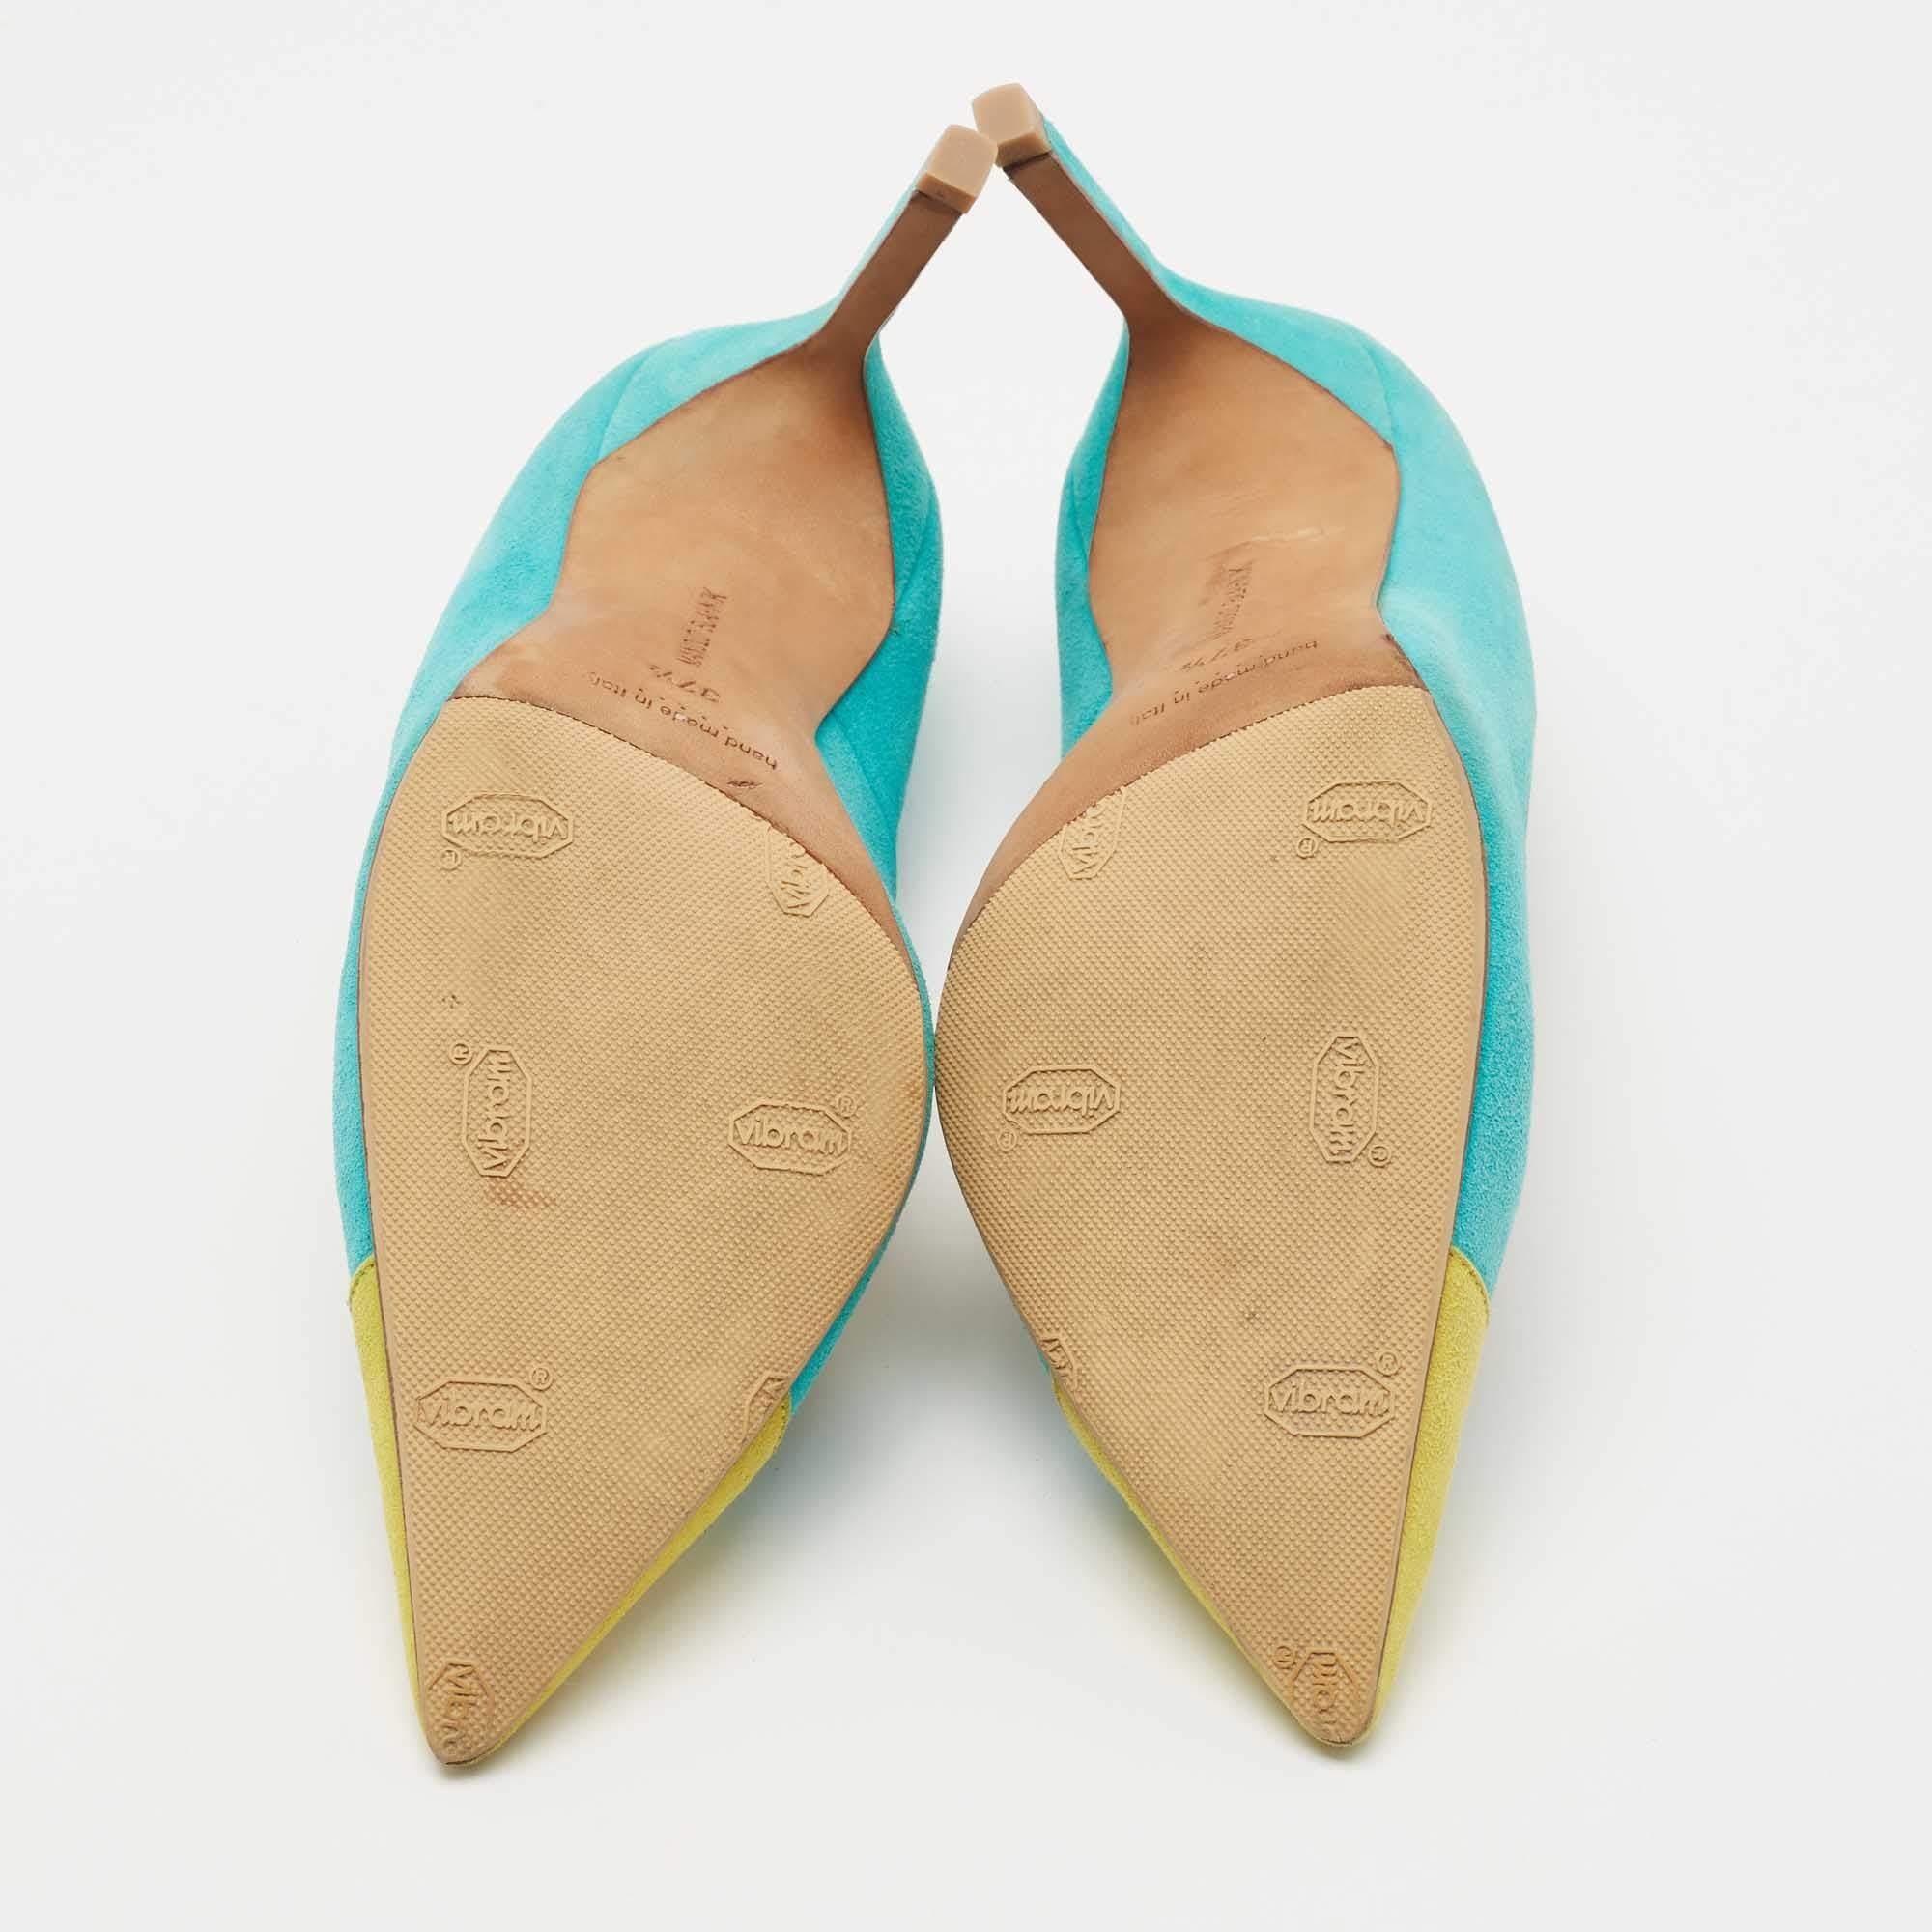 Manolo Blahnik Turquoise/Yellow Suede Bipunta Pumps Size 37.5 For Sale 3